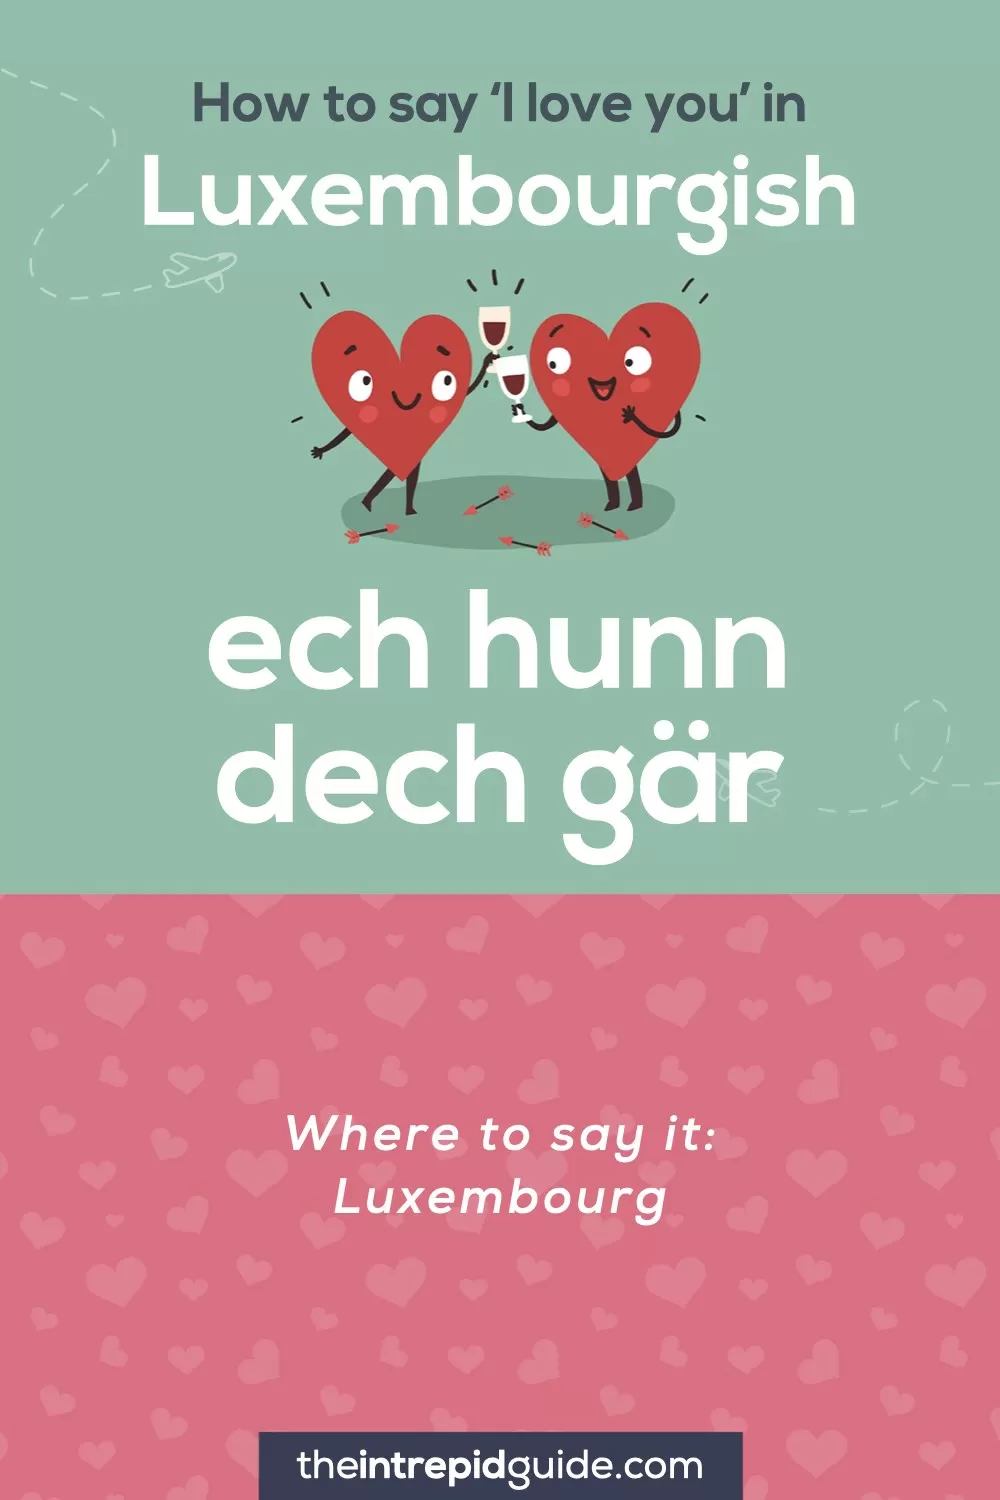 How to say I love you in different languages - Luxembourgish - ech hunn dech gar